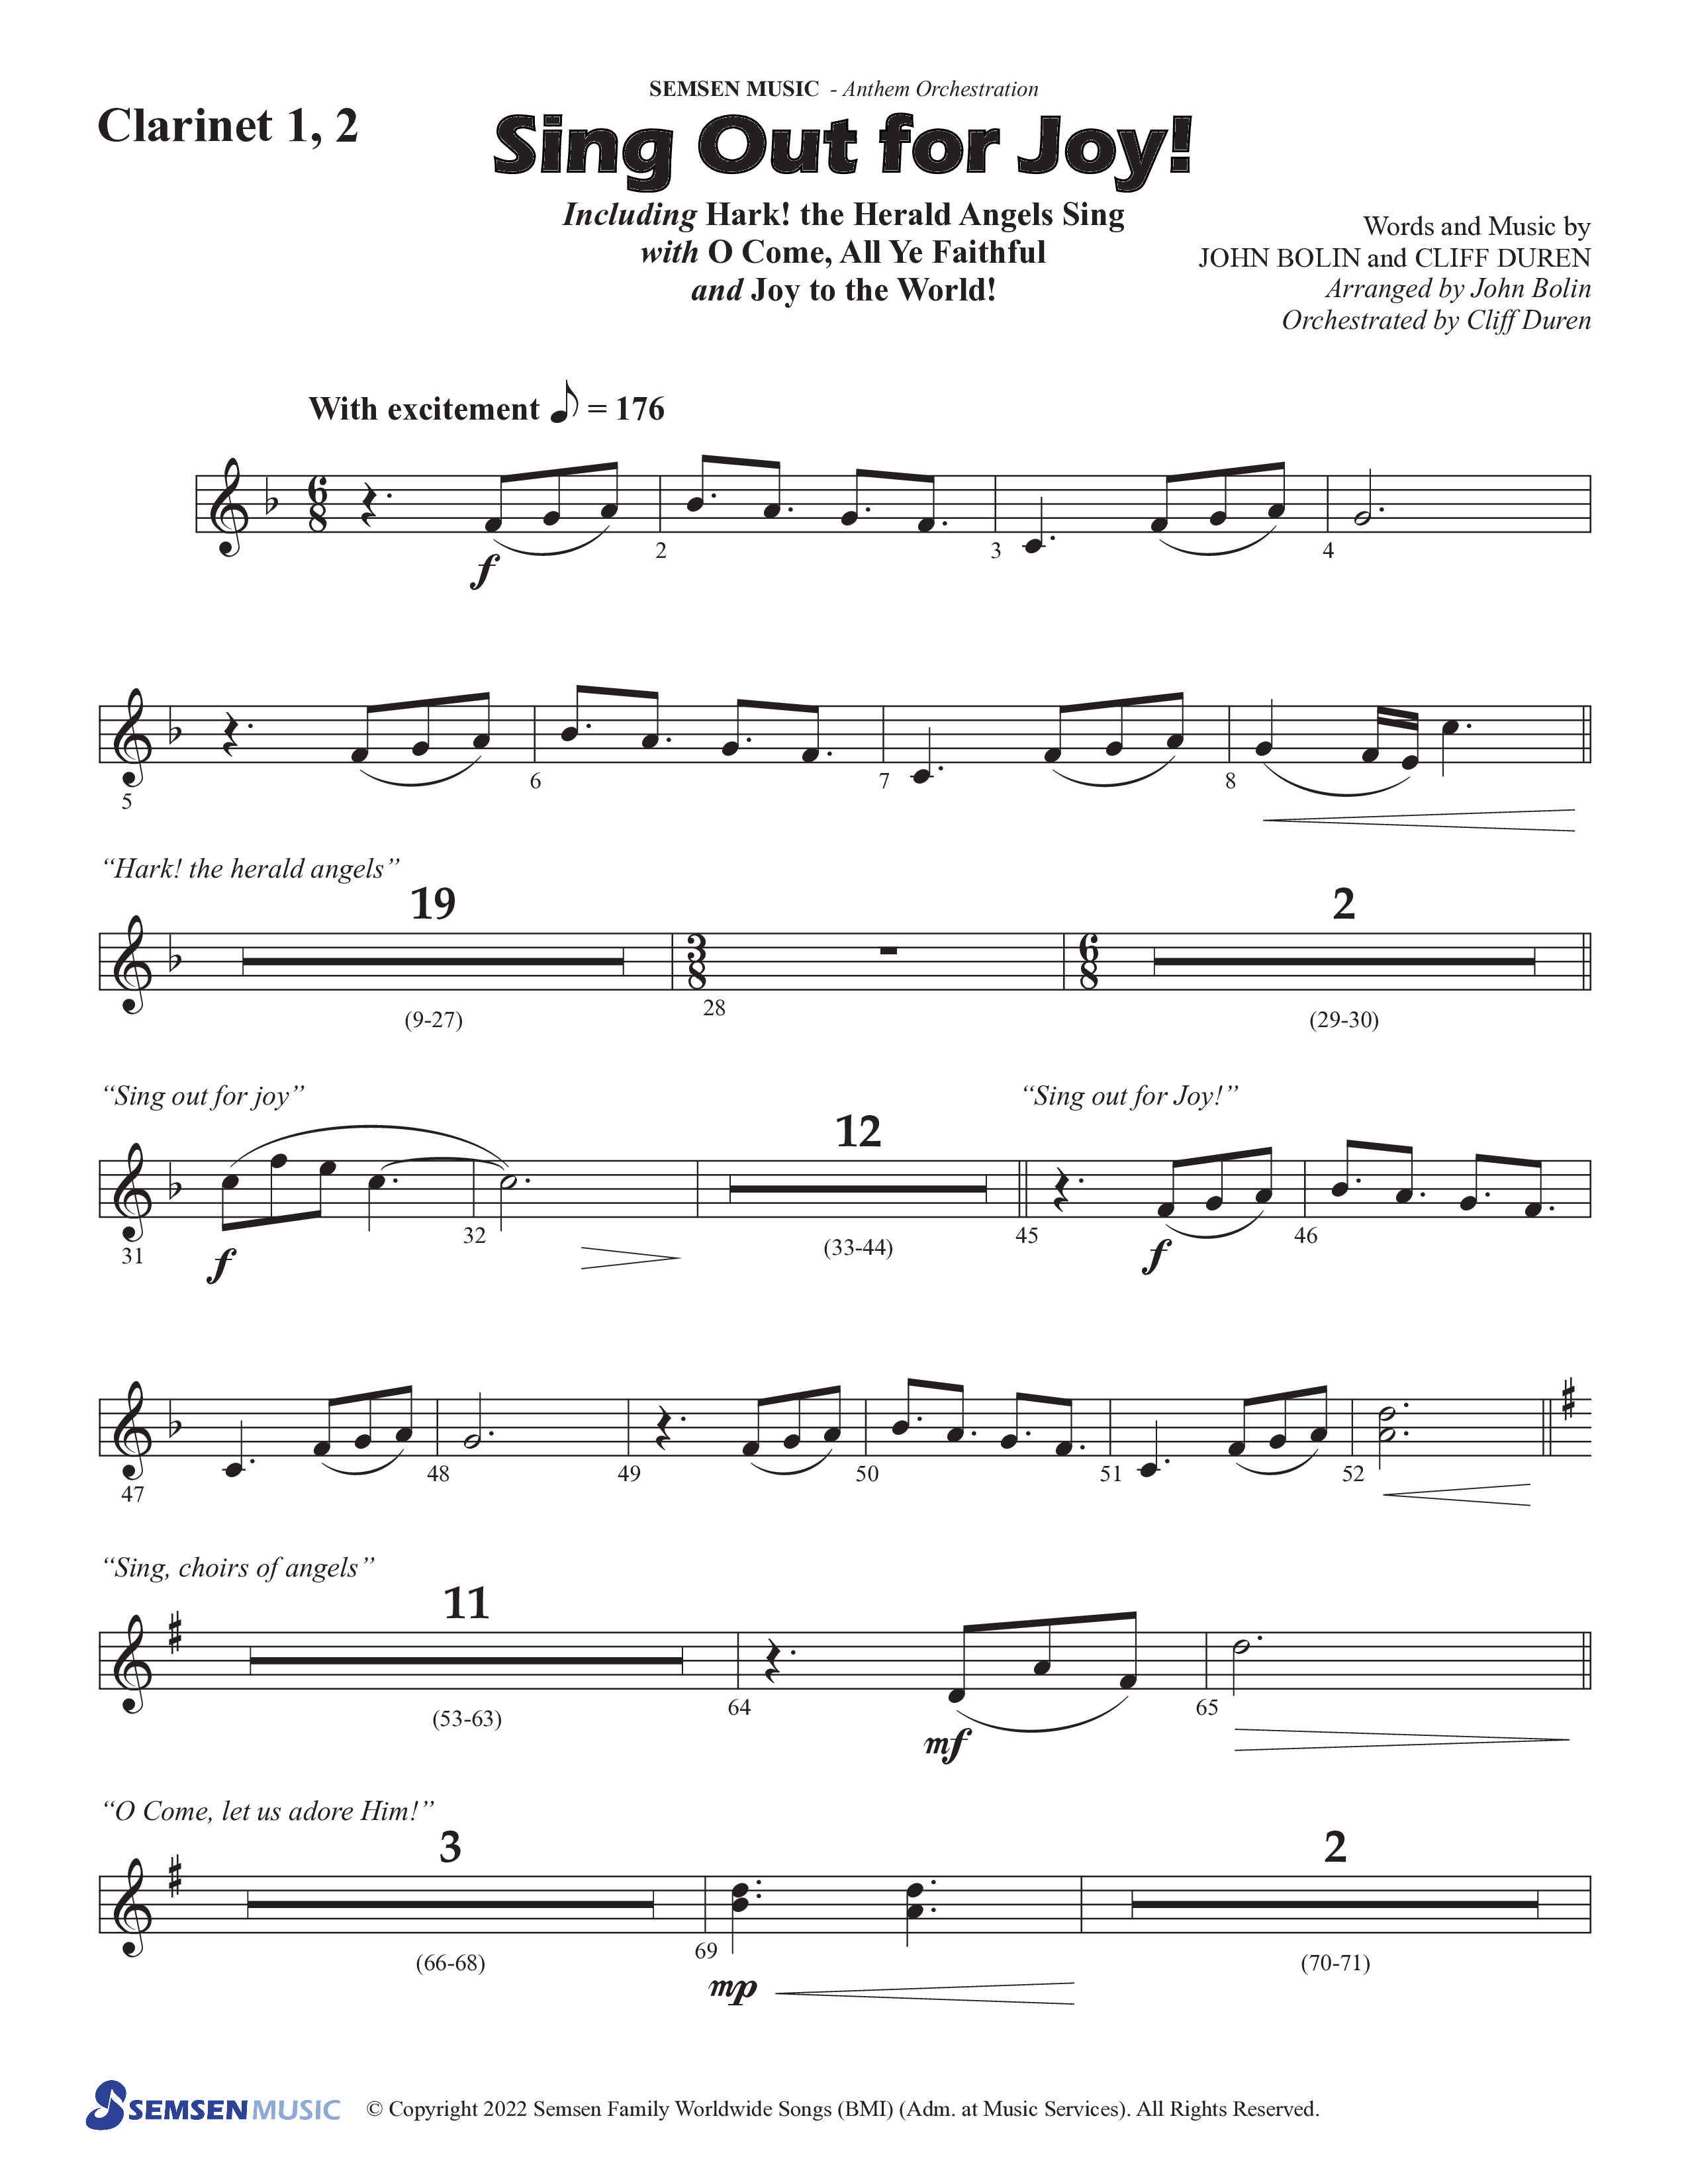 Sing Out For Joy (Choral Anthem SATB) Clarinet 1/2 (Semsen Music / Arr. John Bolin / Orch. Cliff Duren)